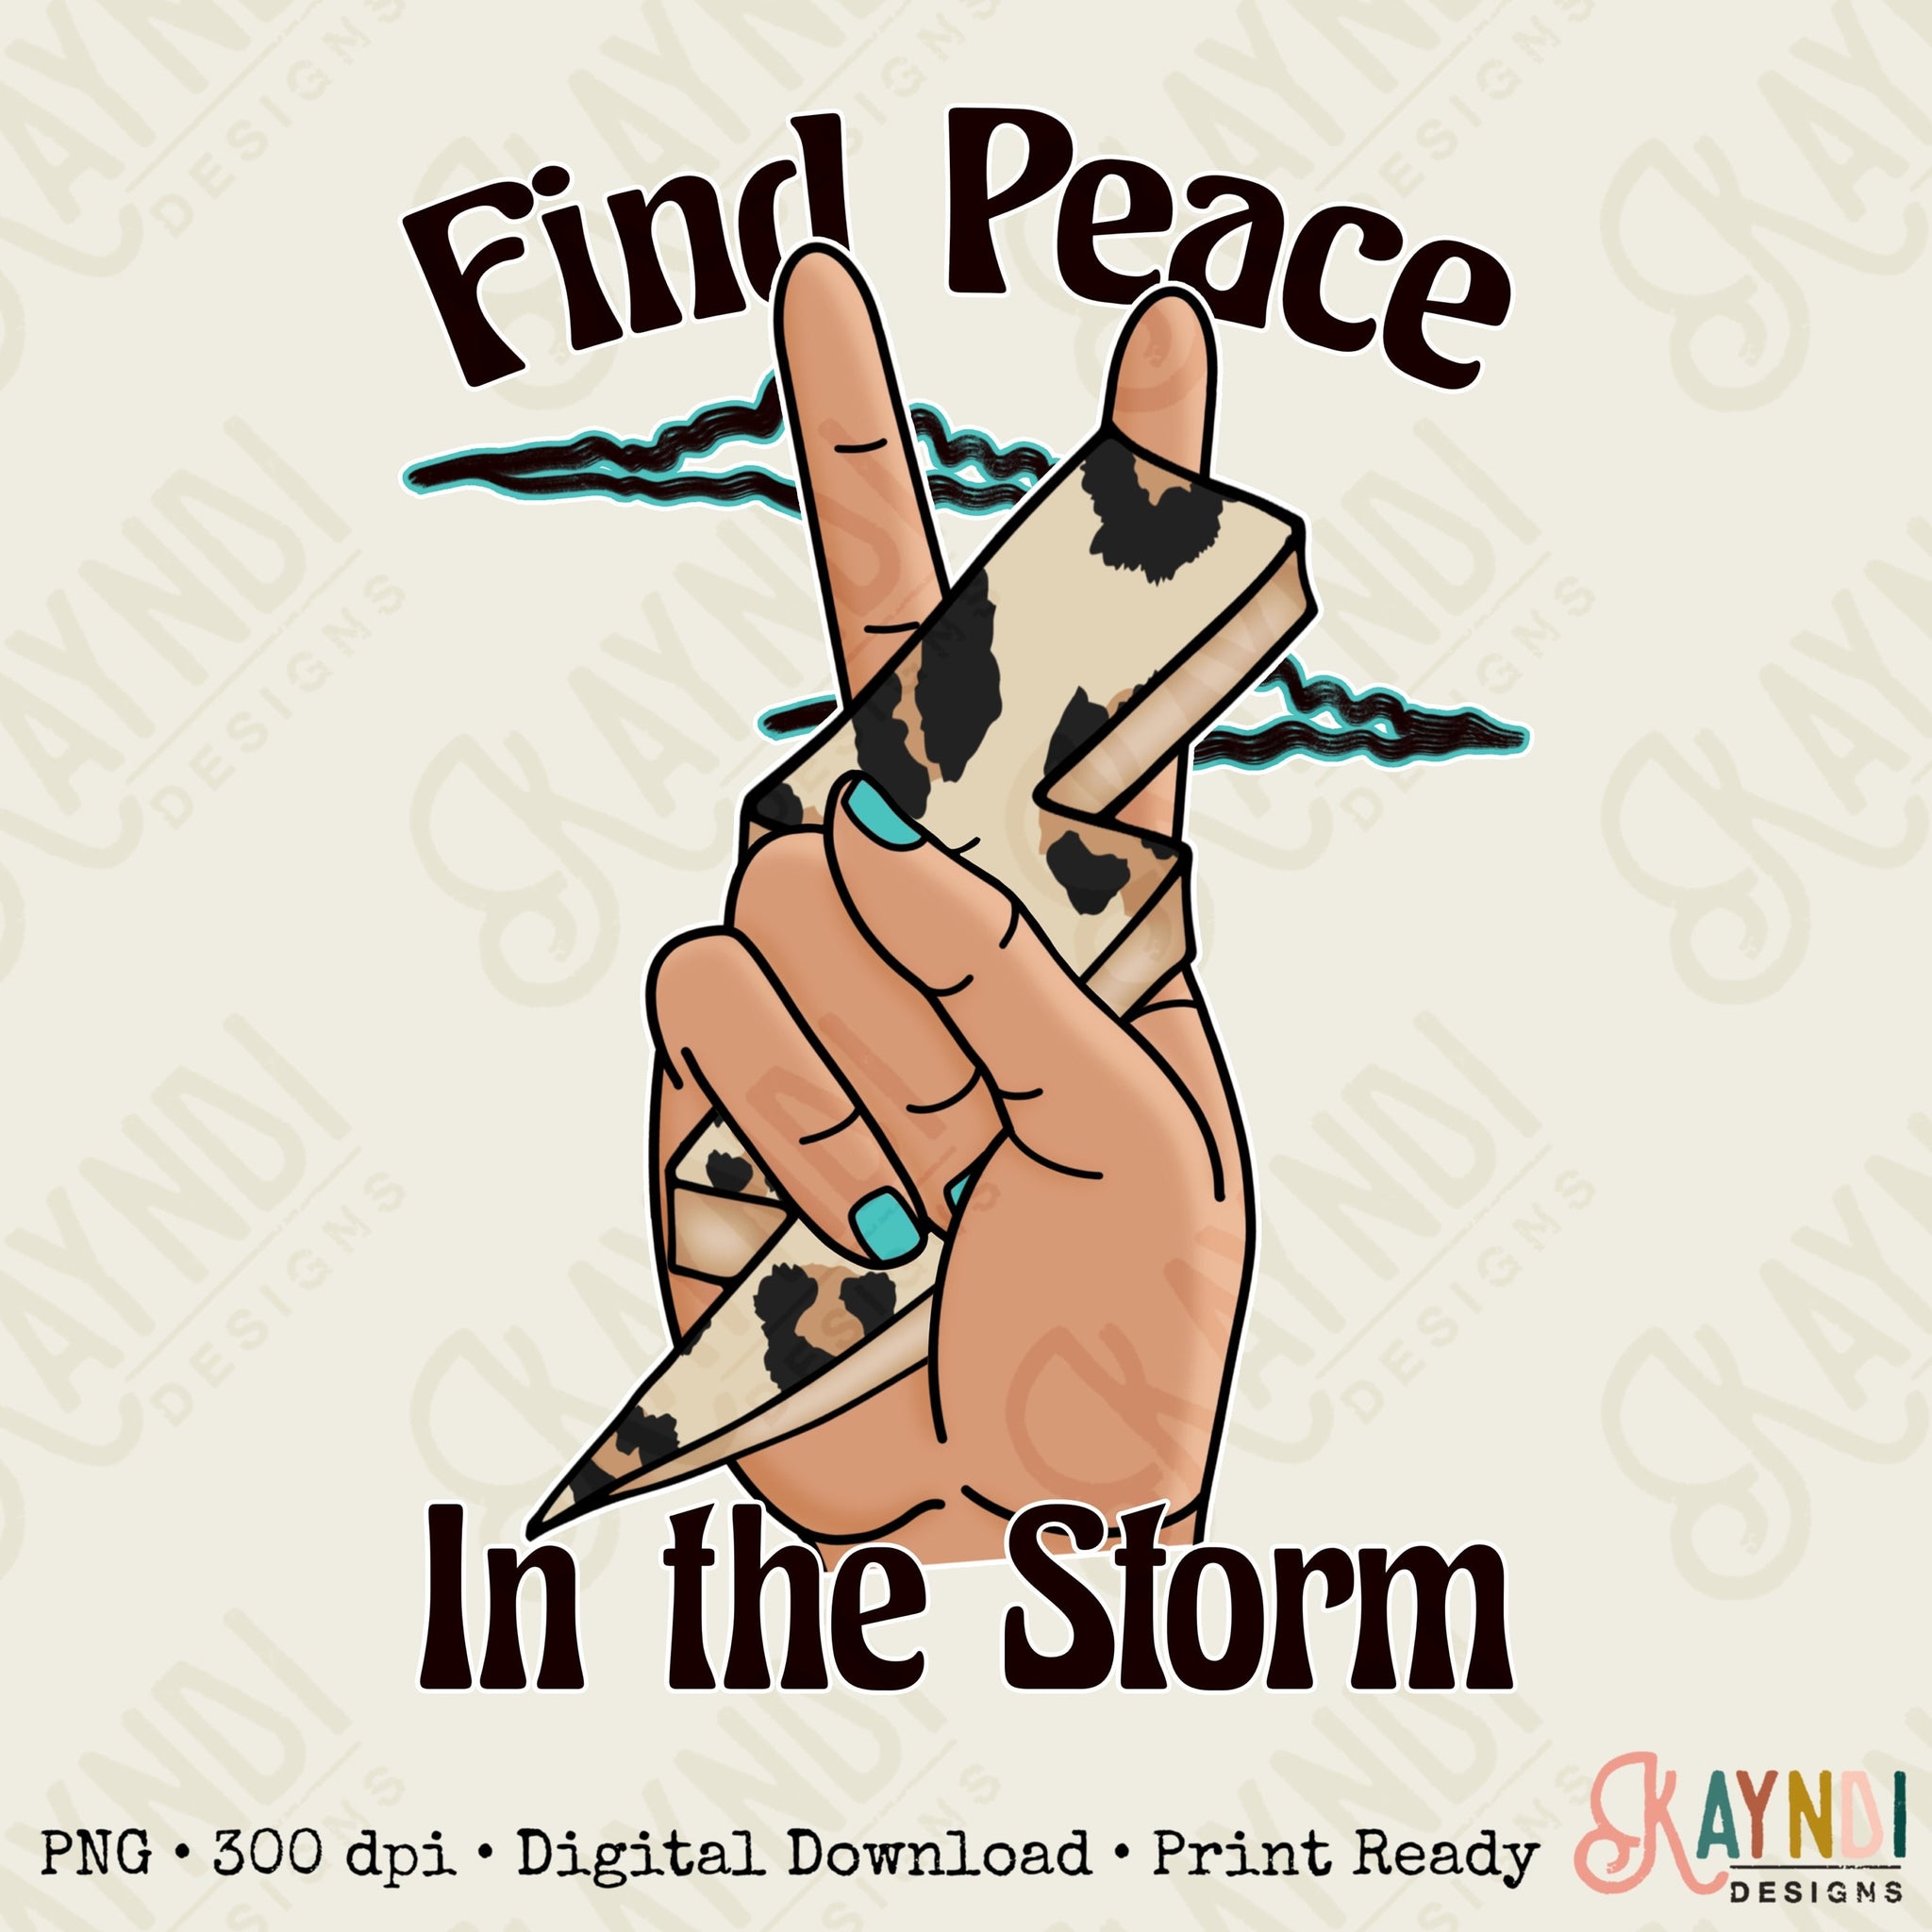 Find Peace in the Storm Sublimation Design PNG Digital Download Printable Mental Health Quote Peace Sign Hand Lightning Bolt Leopard 3